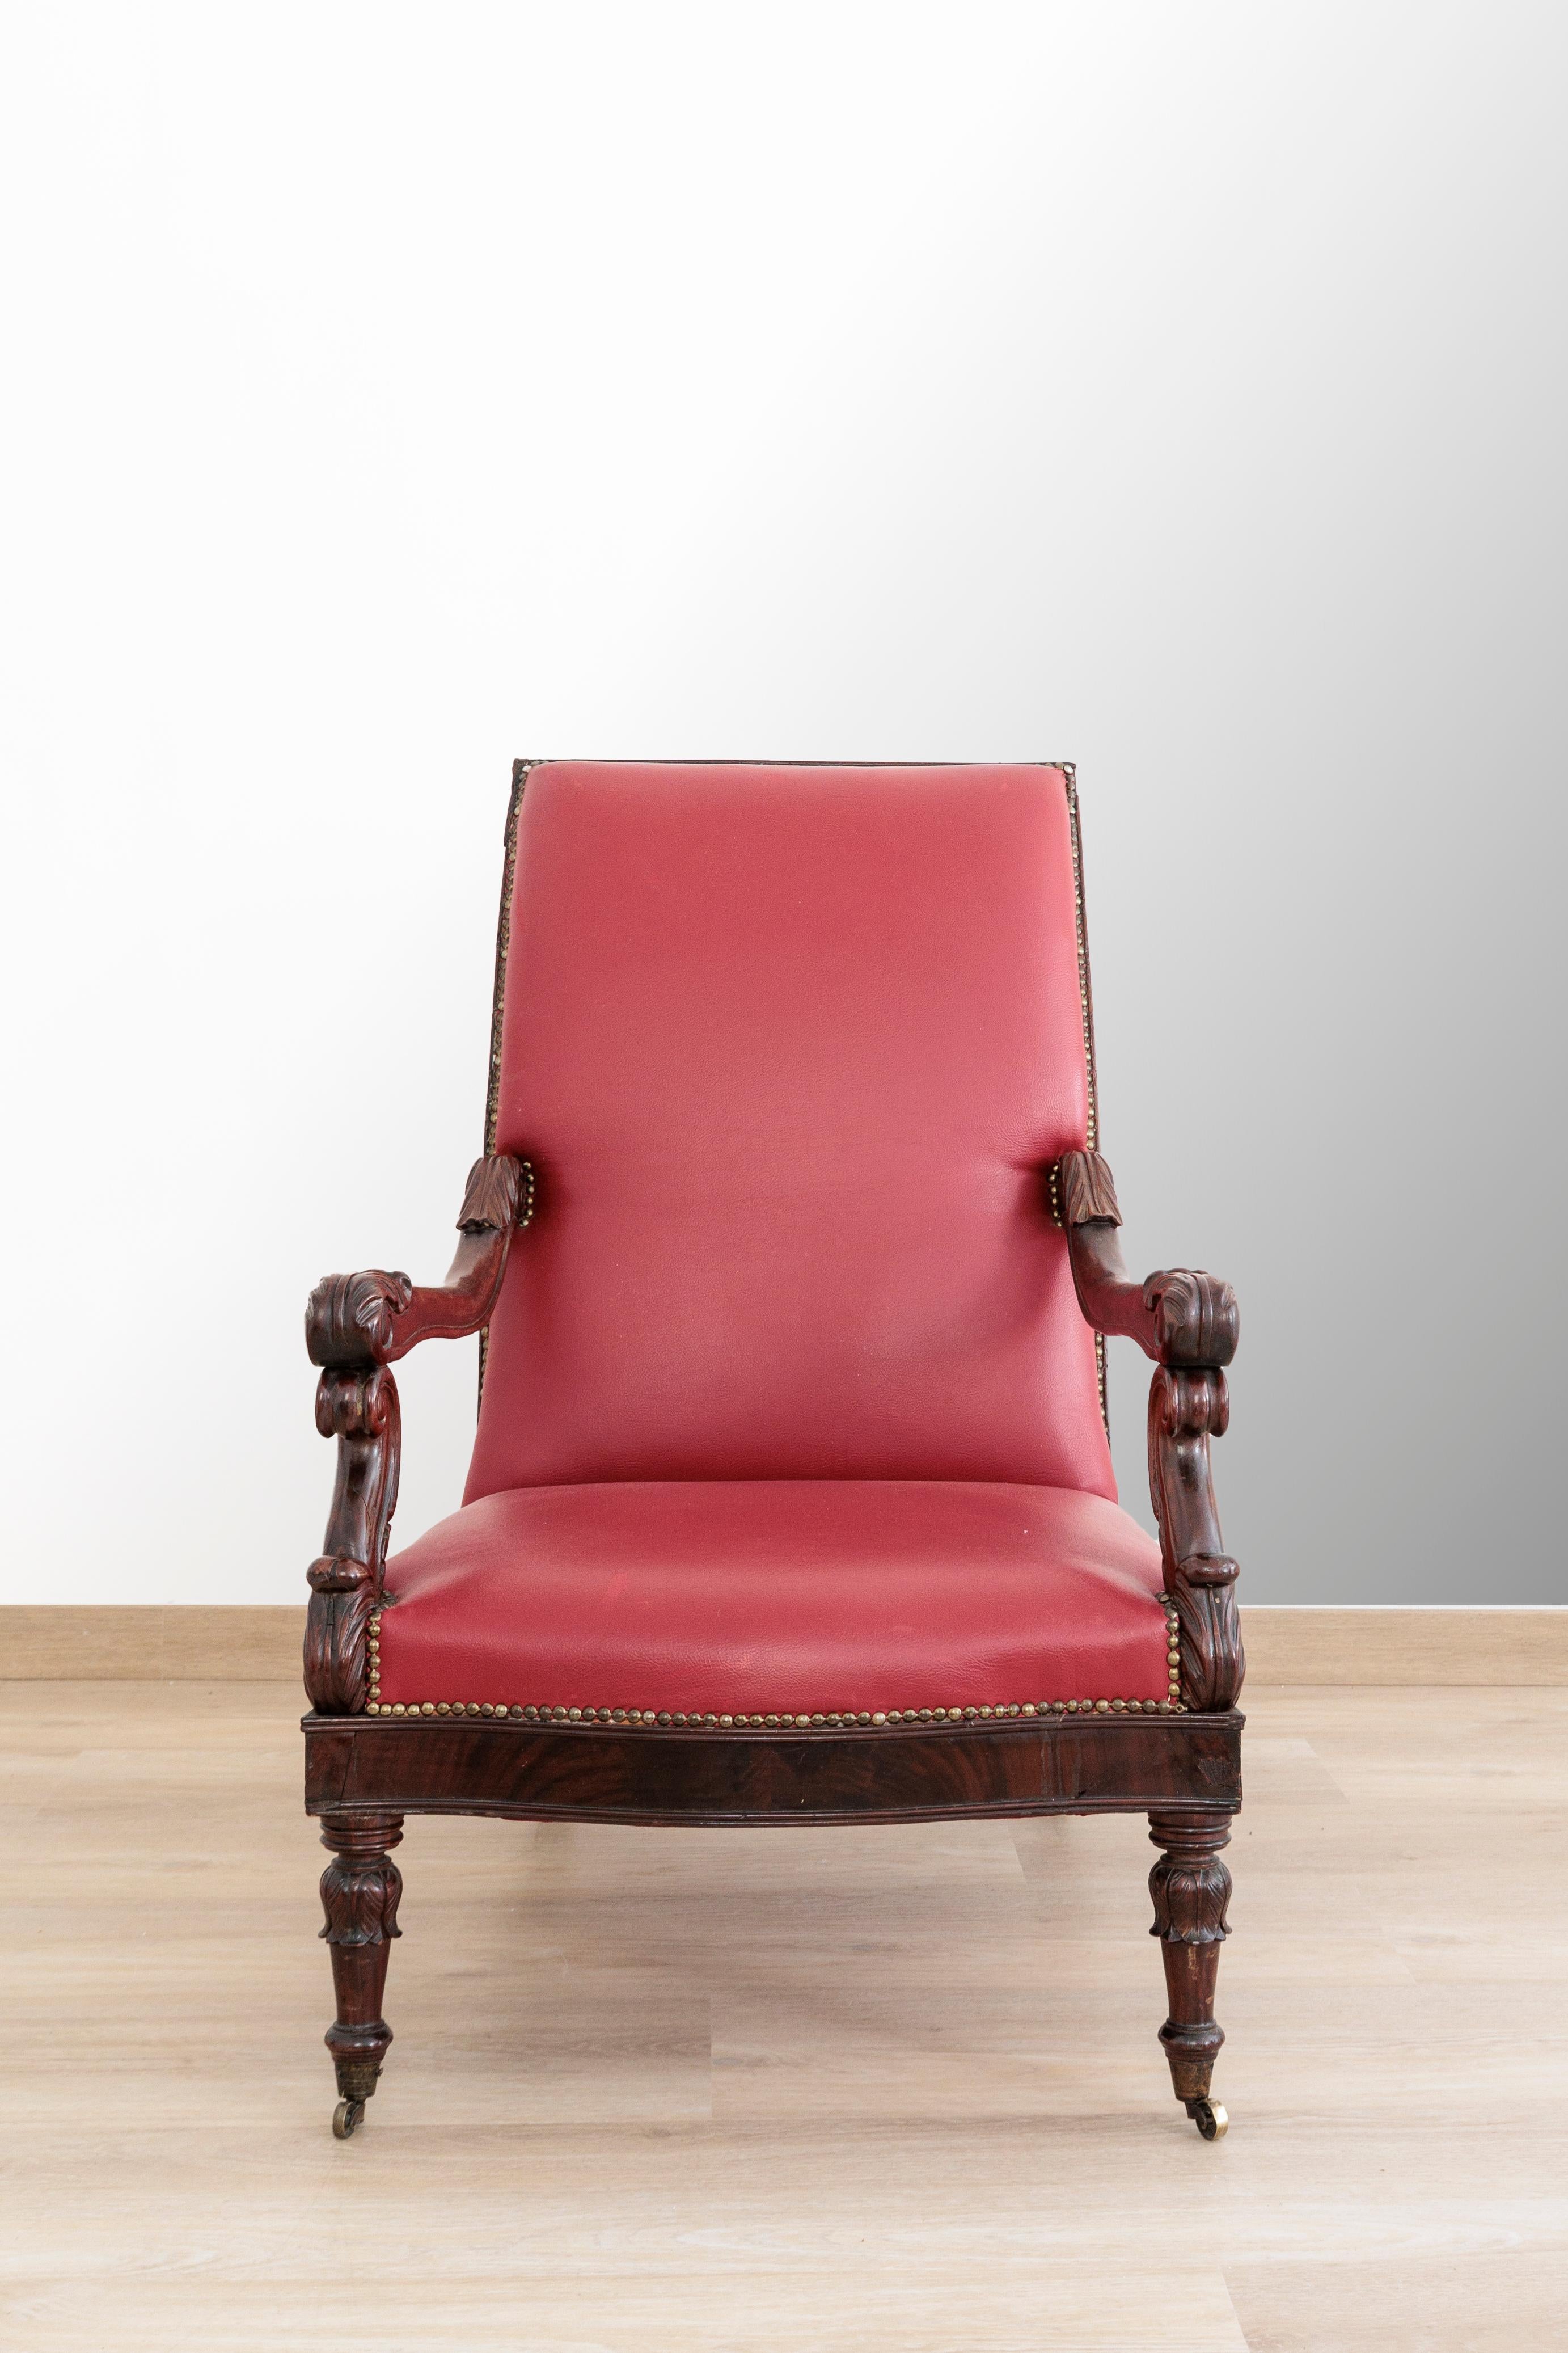 Carlo X lounge chair in mohogany and mahogany feather Beautiful and comfortable, upholstered in red leather. France 1840s. Original. The armchair has wheels in the front legs to facilitate movement. It has carved armrests, flared rear legs that